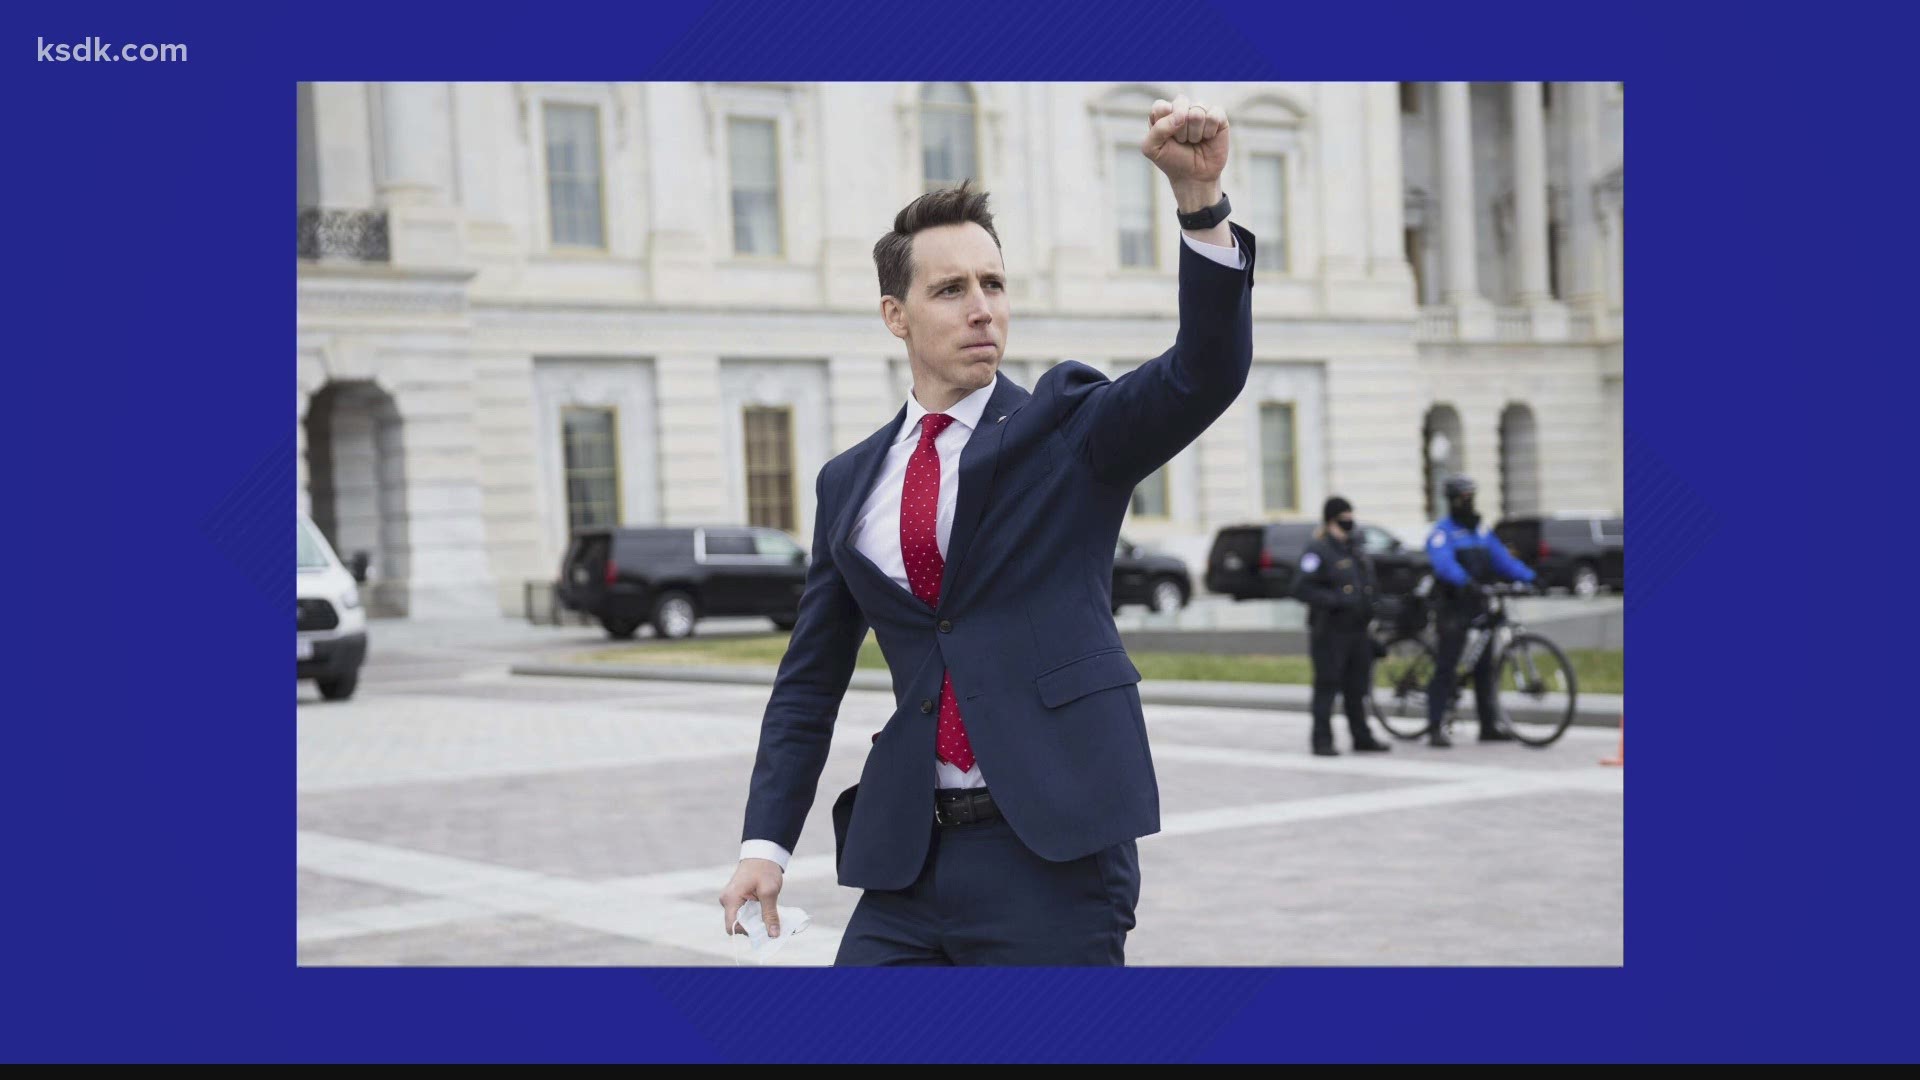 A photo of Hawley was spread widely throughout the day Wednesday, showing him raising a fist in support of the crowd assembled outside the Capitol.